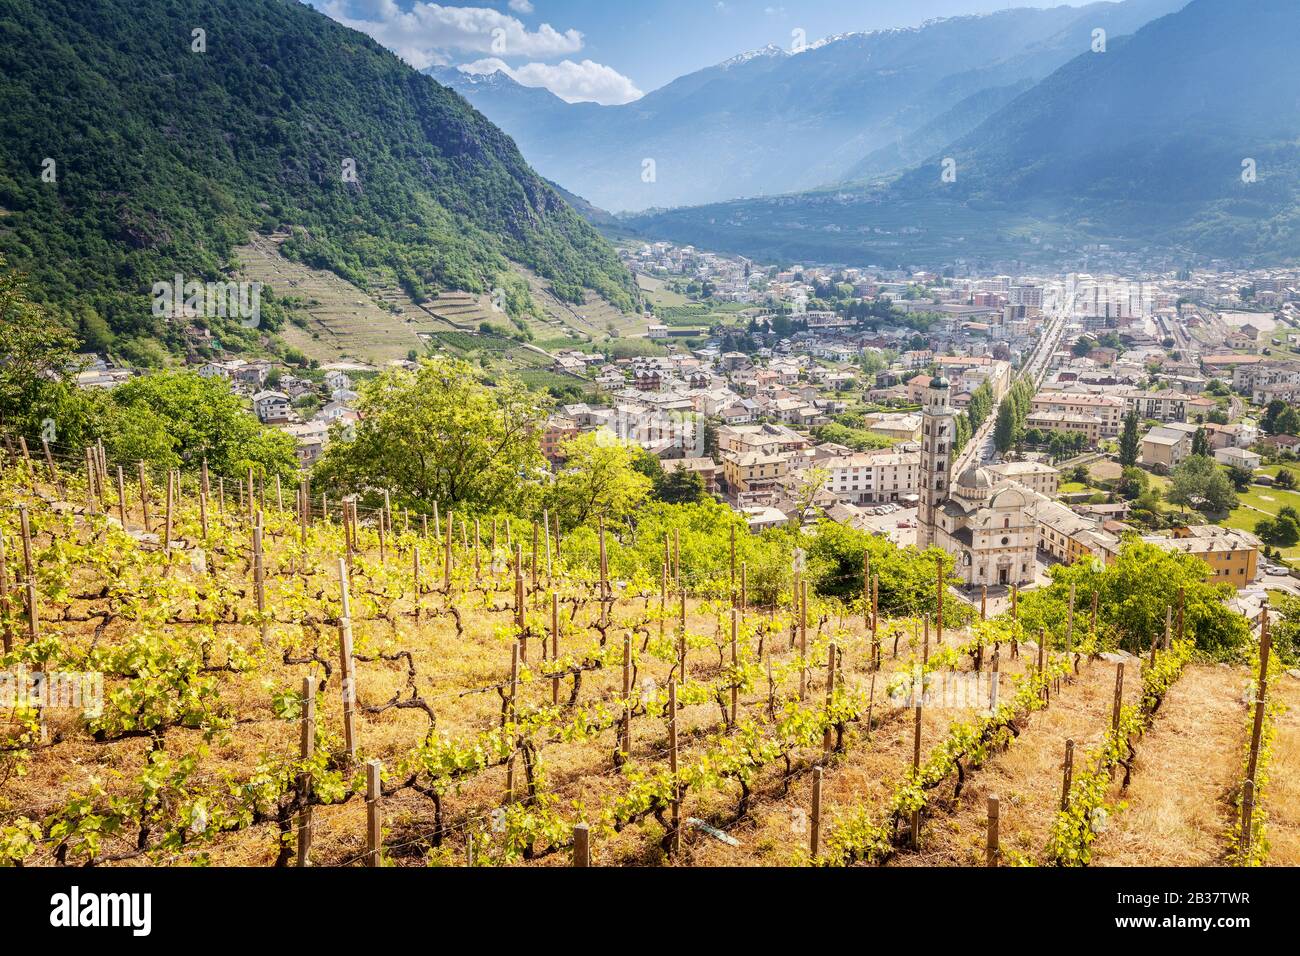 Tirano - Valtellina (IT) - View of the Basilica from above Stock Photo